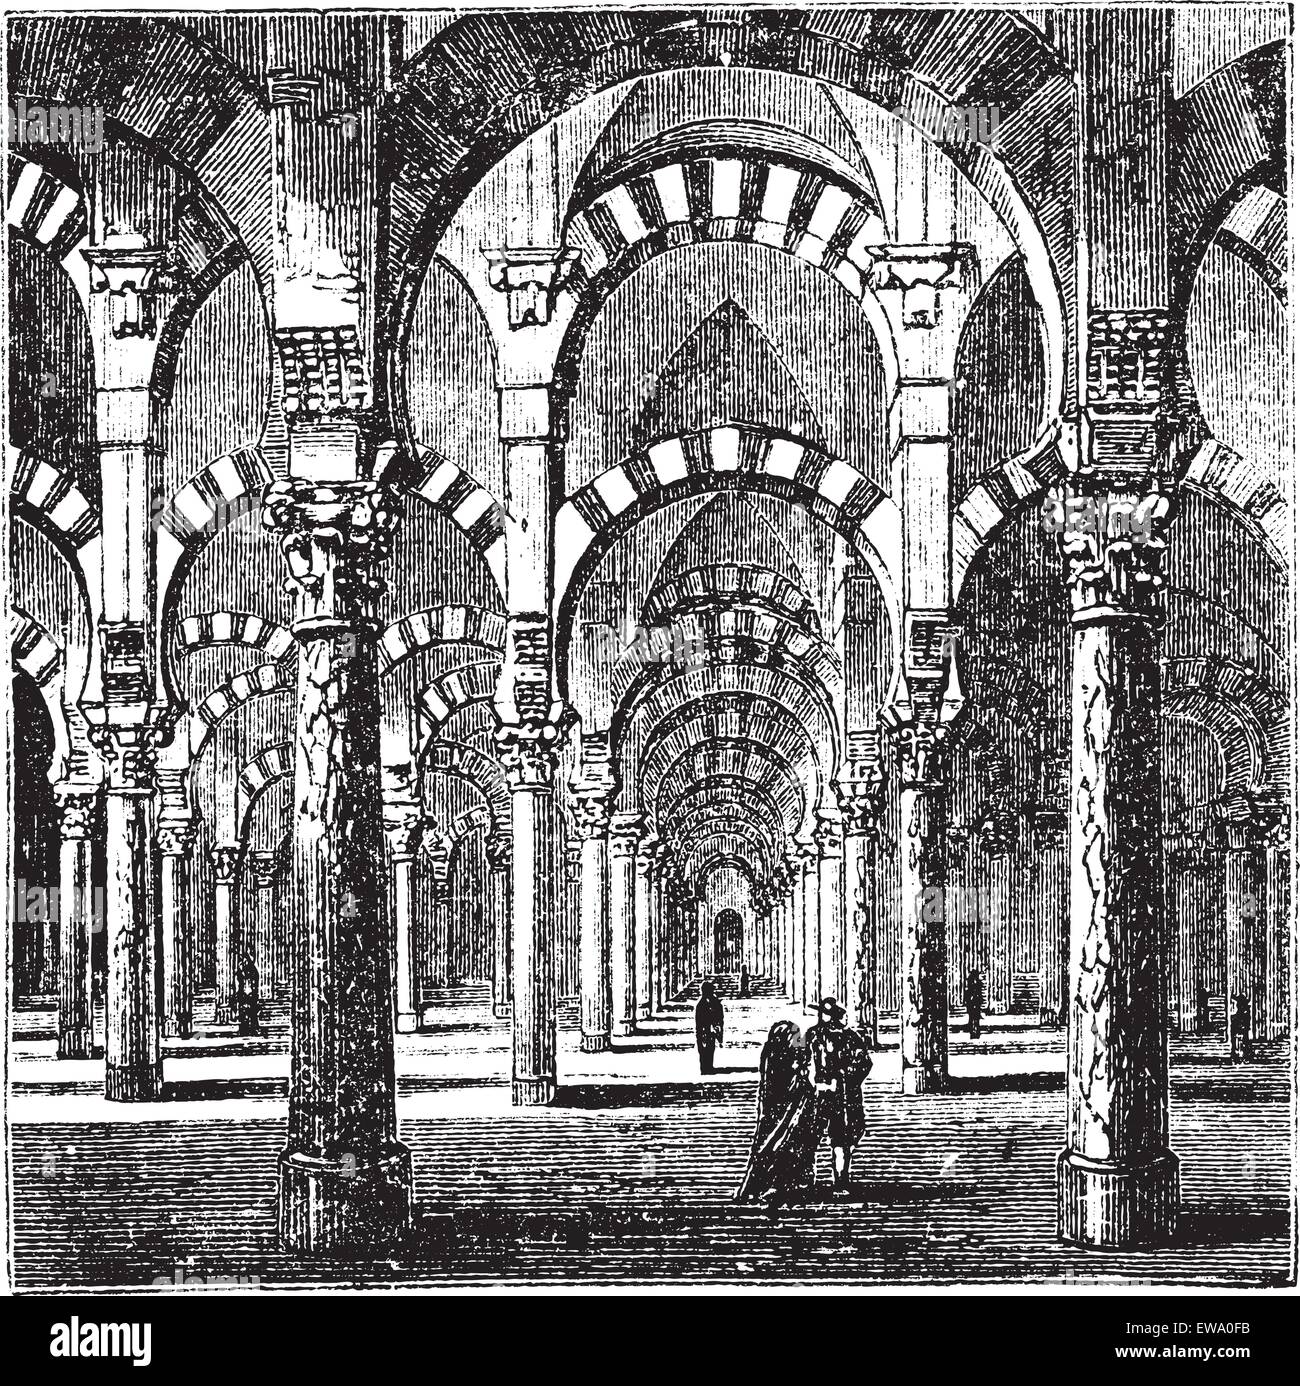 Cathedral-Mosque of Cordoba in Andalusia, Spain, during the 1890s, vintage engraving. Old engraved illustration of the interior of the Cathedral-Mosque of Cordoba. Stock Vector